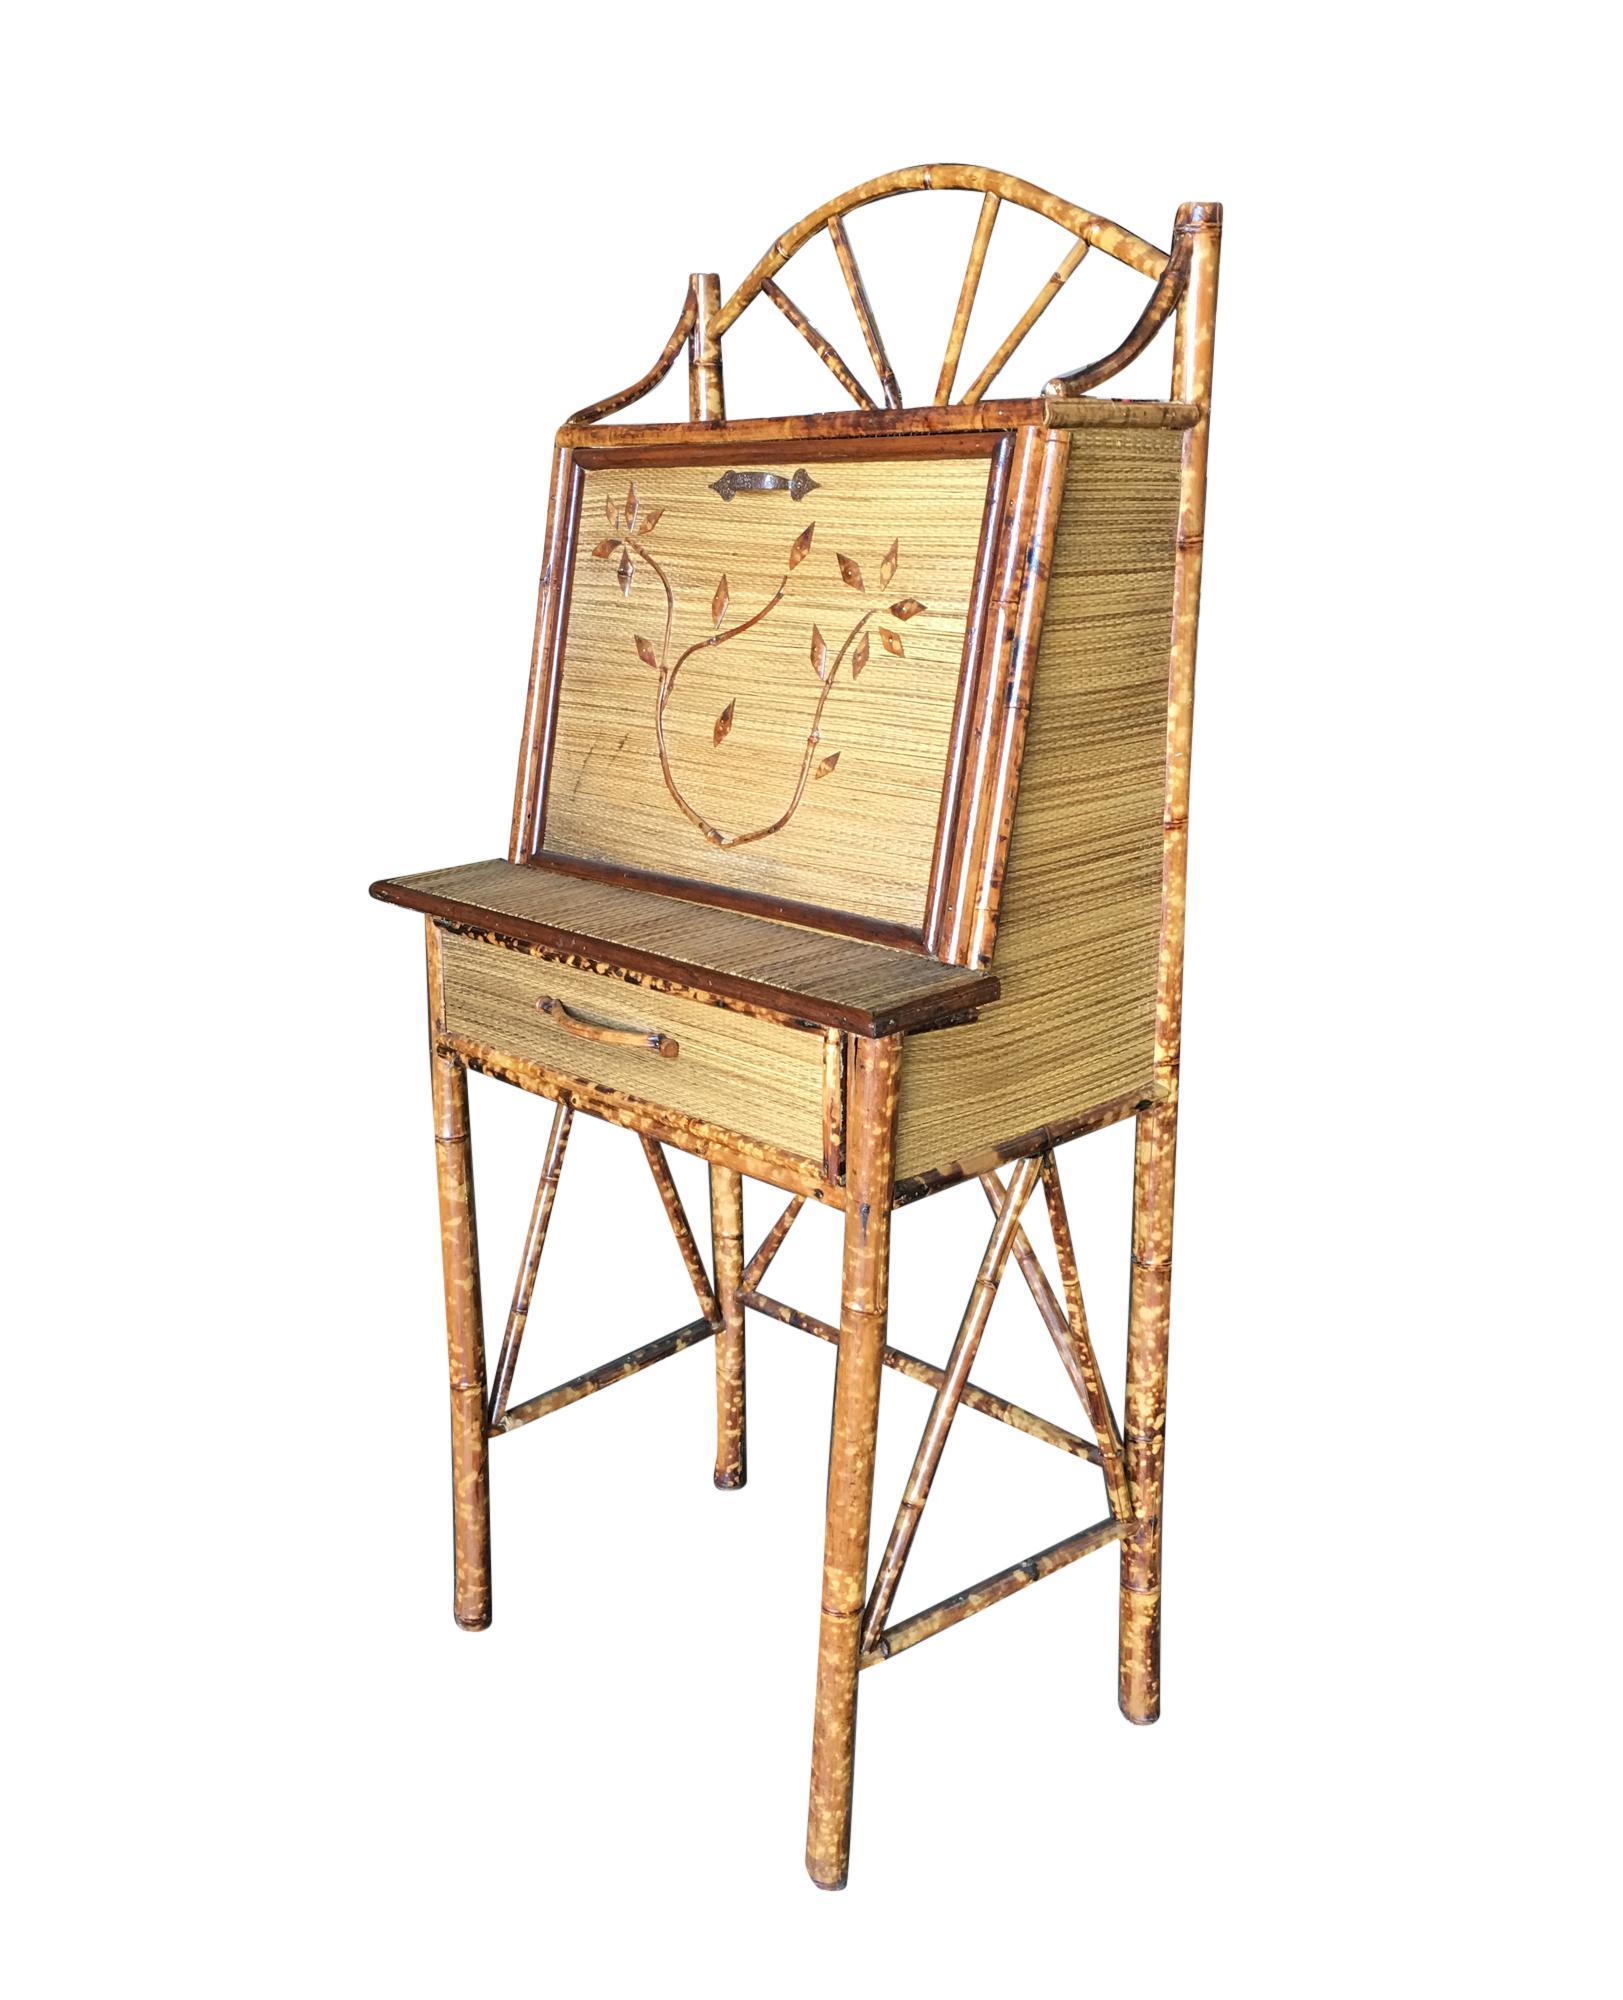 Tiger bamboo secretary desk with handwoven rice mat coverings and cut bamboo floral sculpture along the front, centre drawer and flip down front opening to five small selves for papers and stationary.

Restored to new for you.

All rattan,